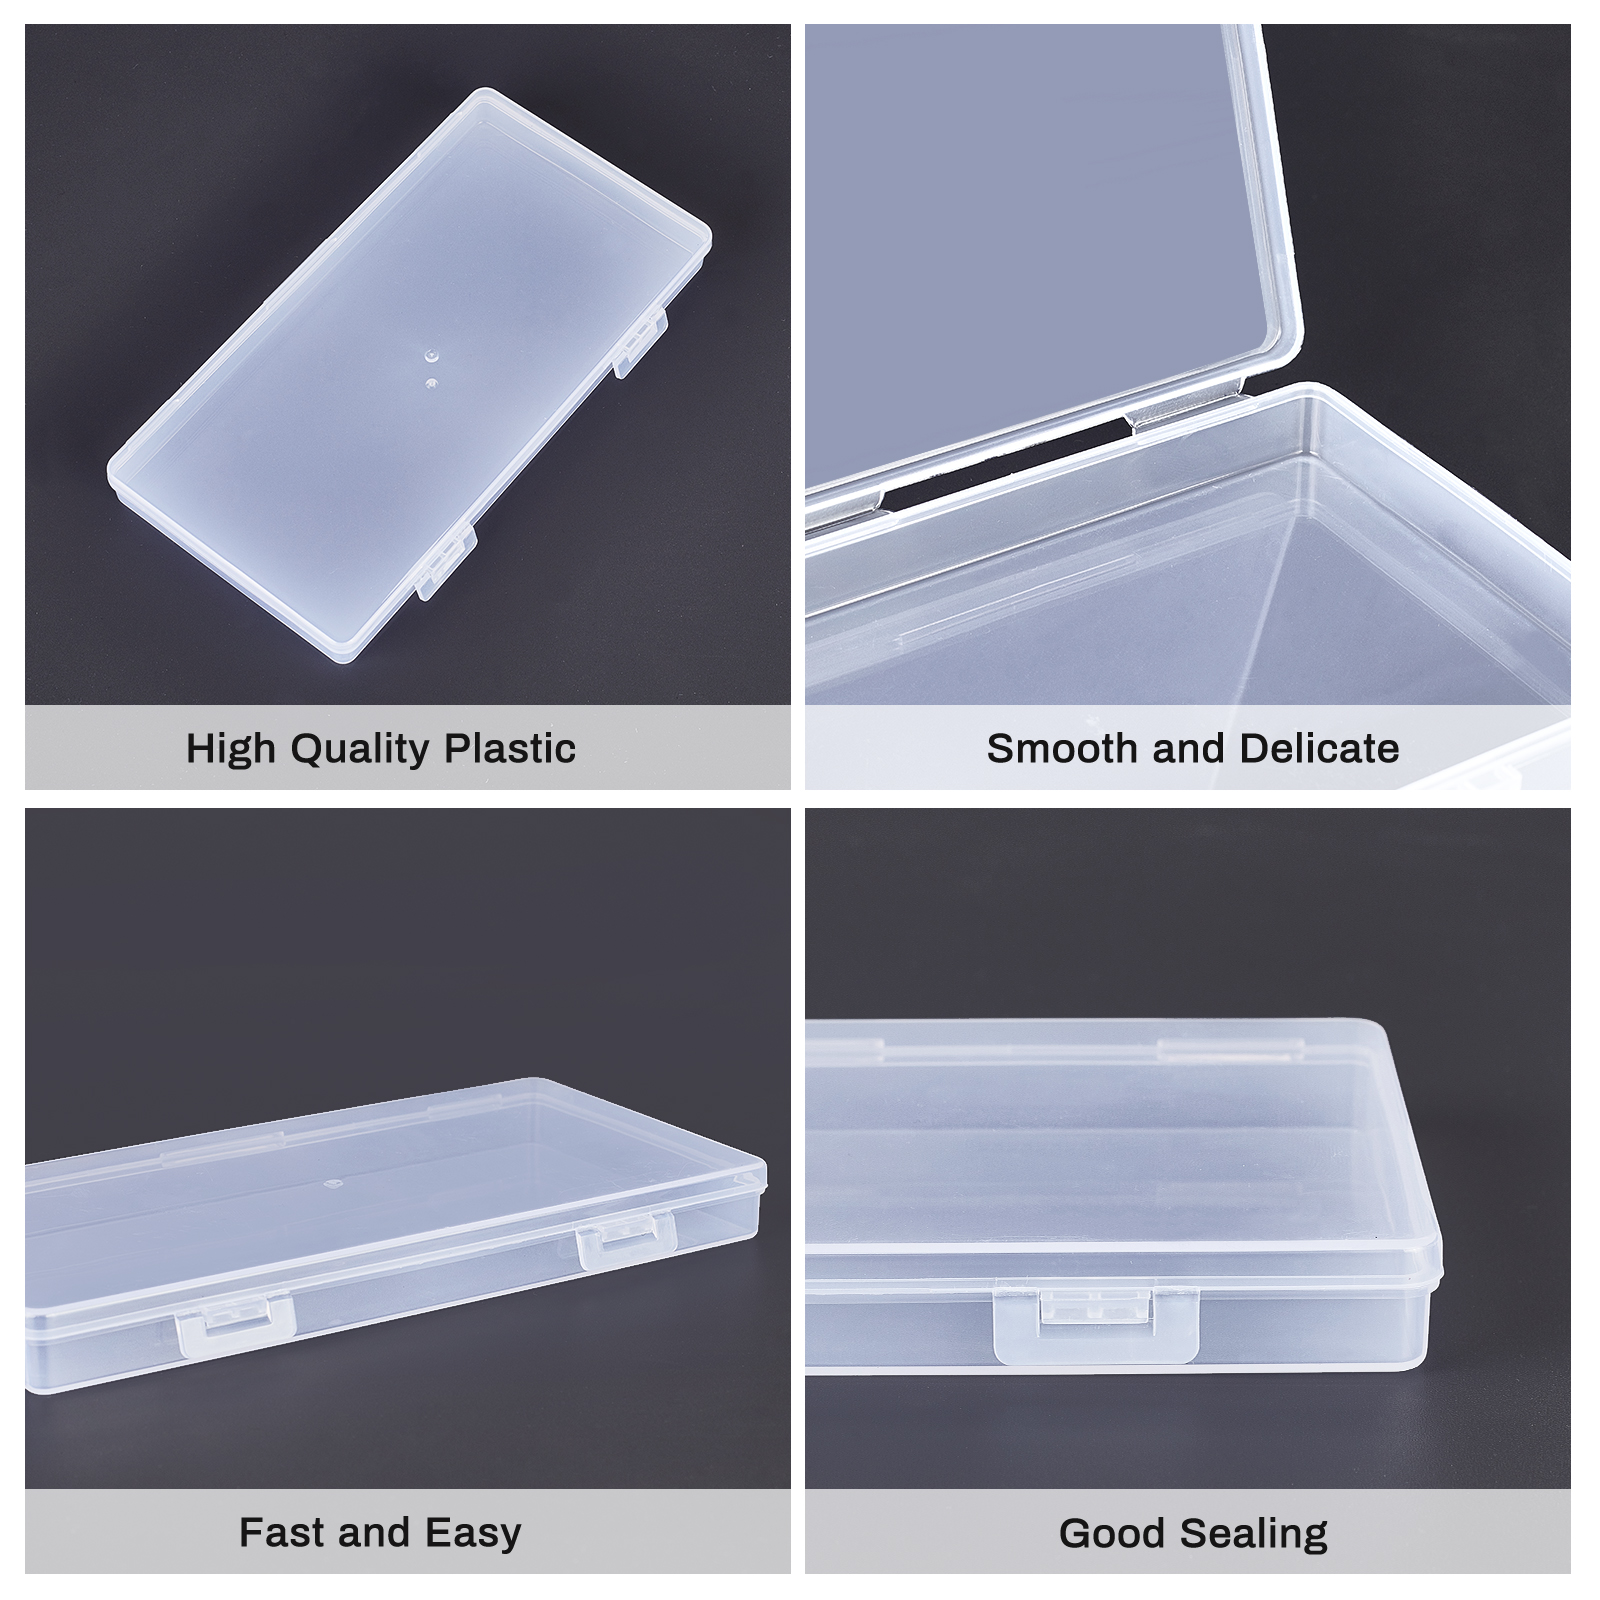 BENECREAT 6 Pack Clear Plastic Box Clear Storage Case Collection